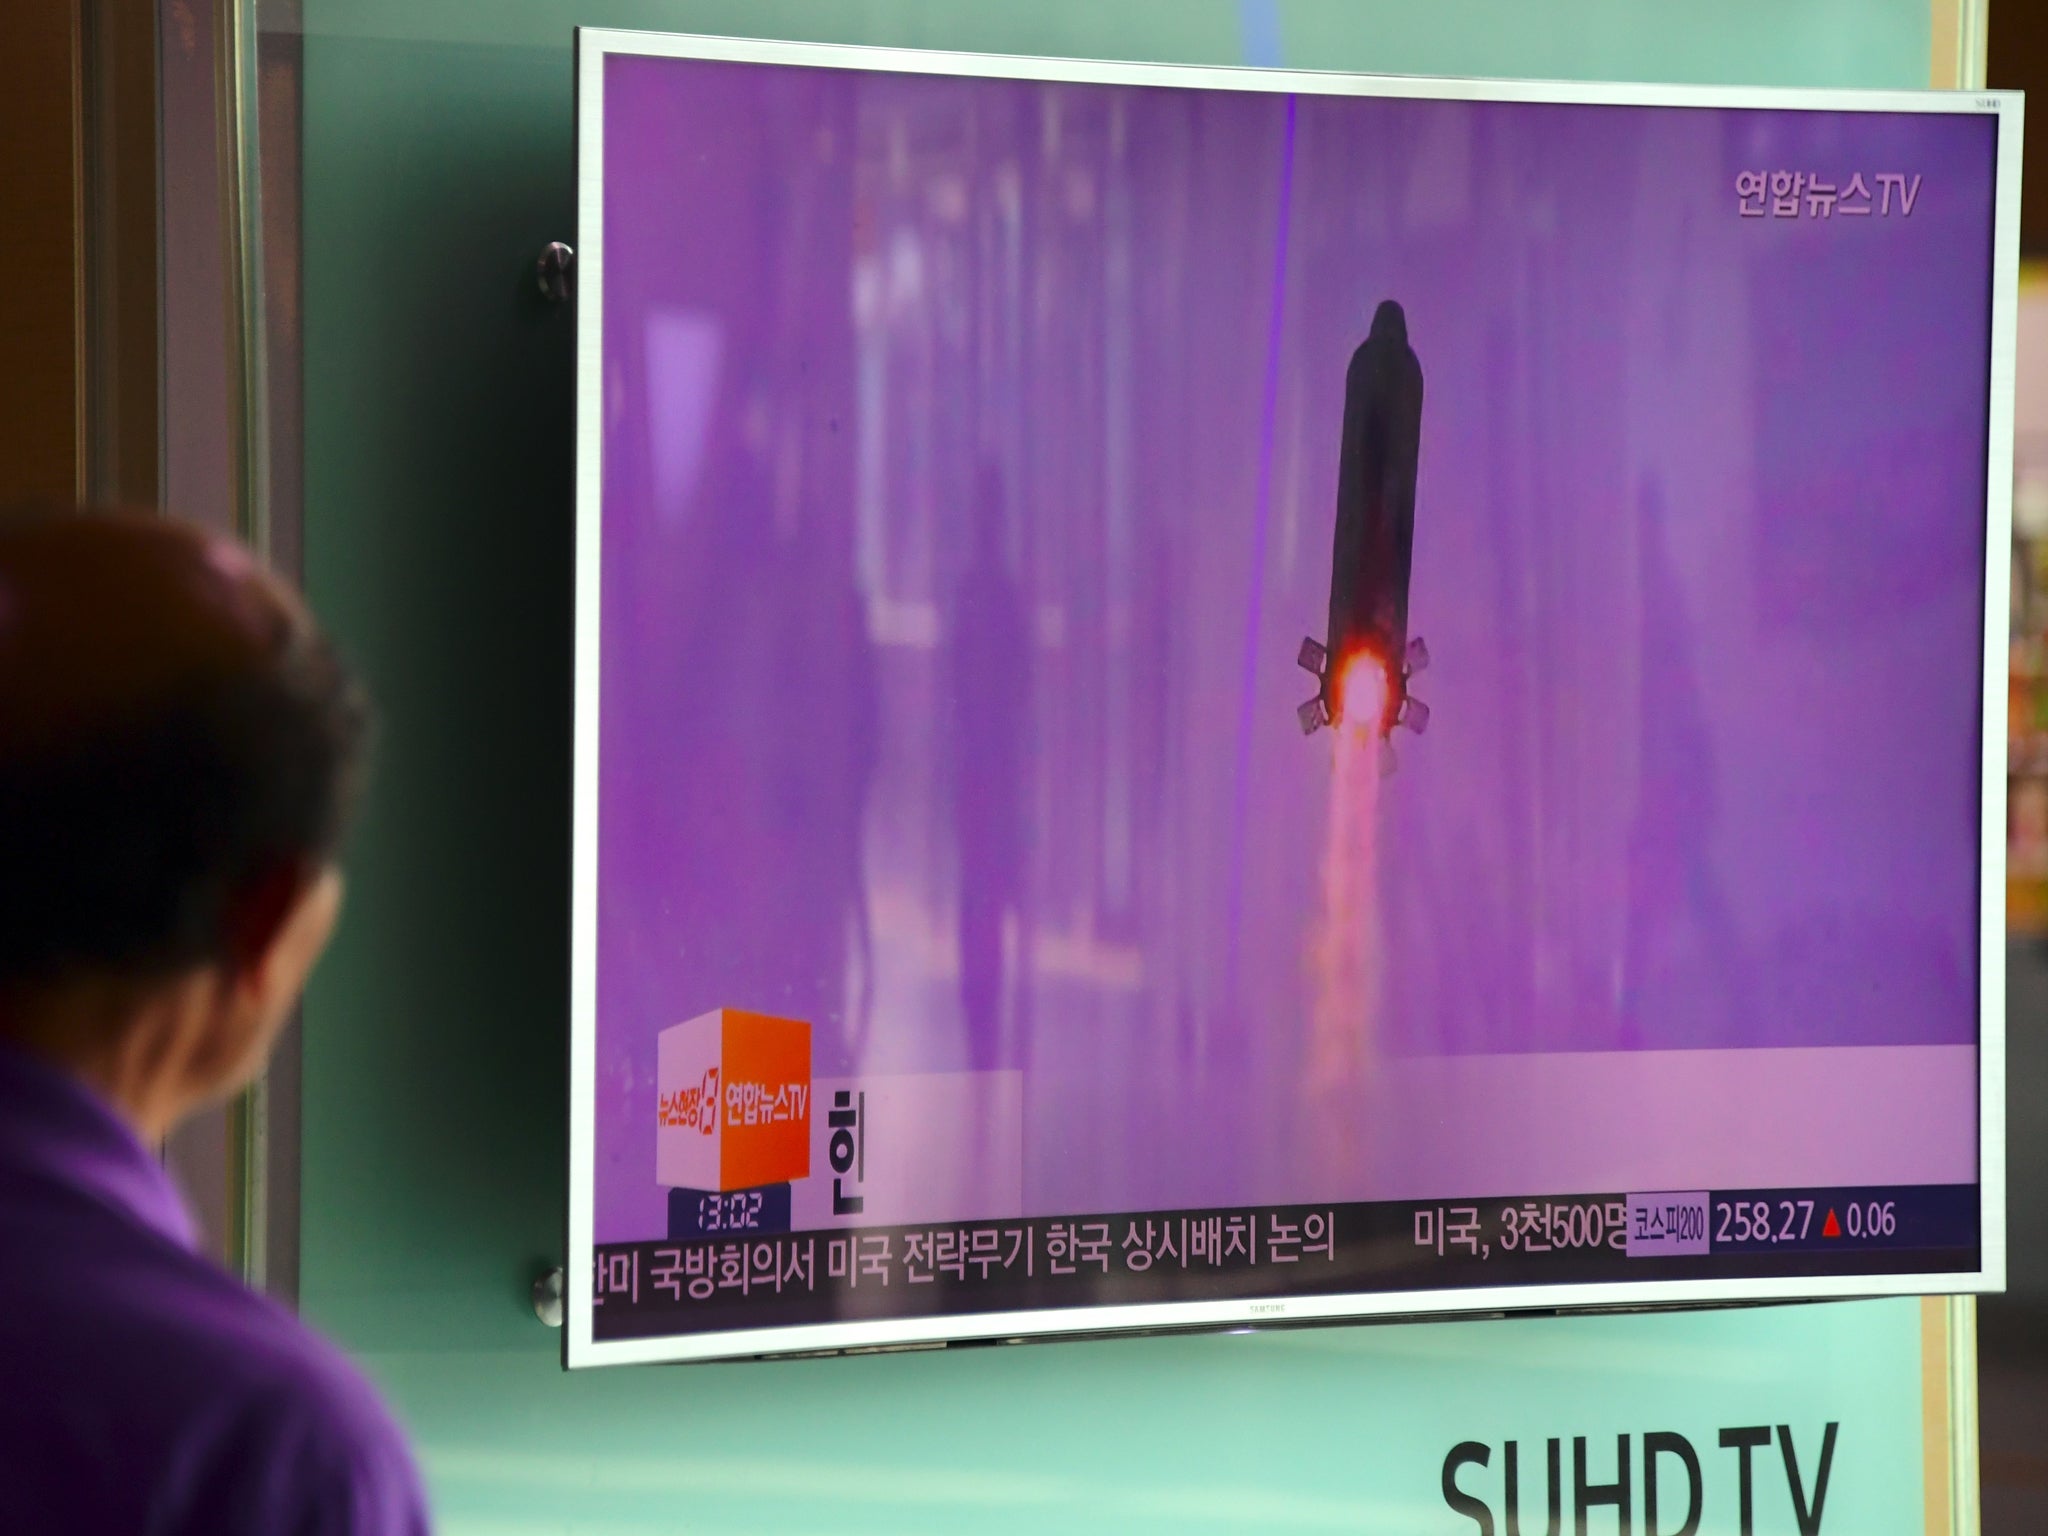 A man in Seoul watches file footage of a North Korea missile launch